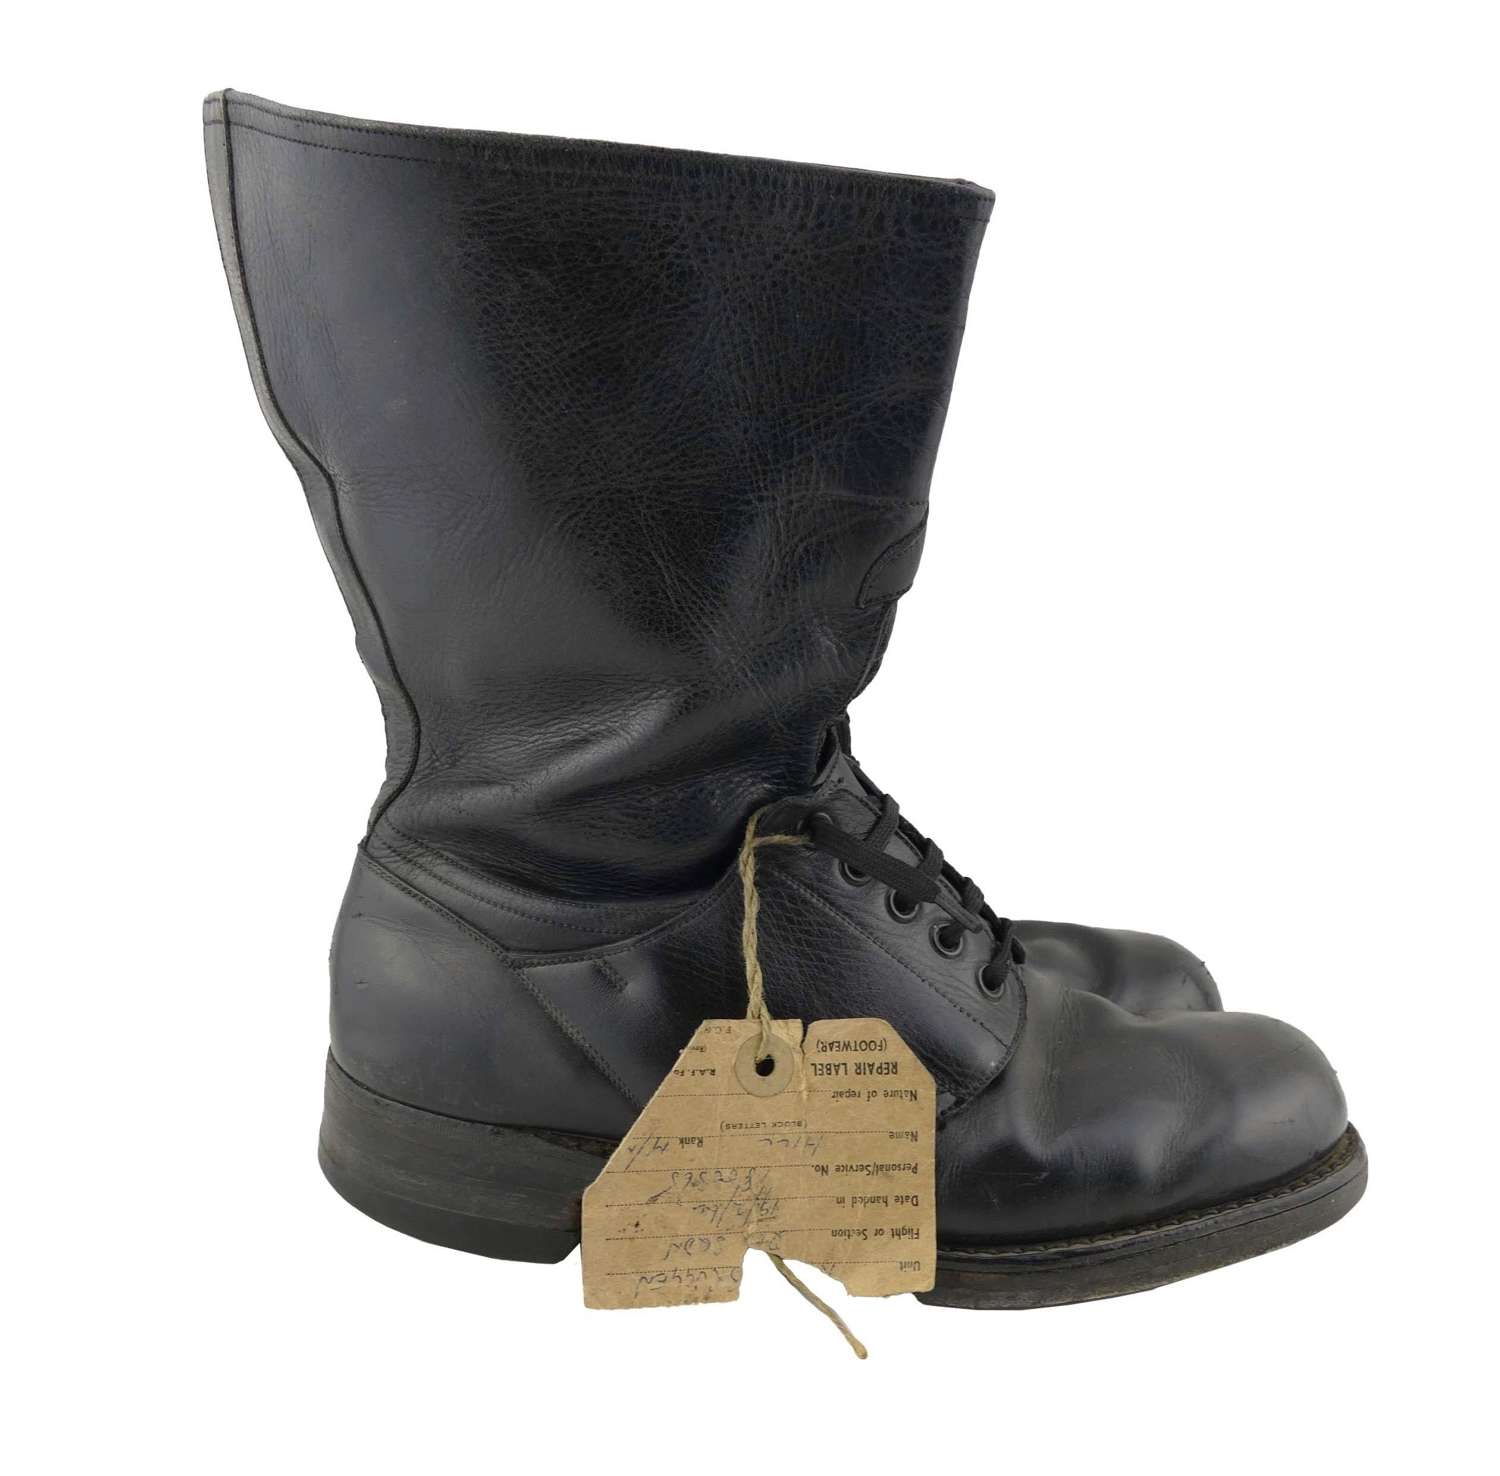 RAF 1951 pattern flying boots